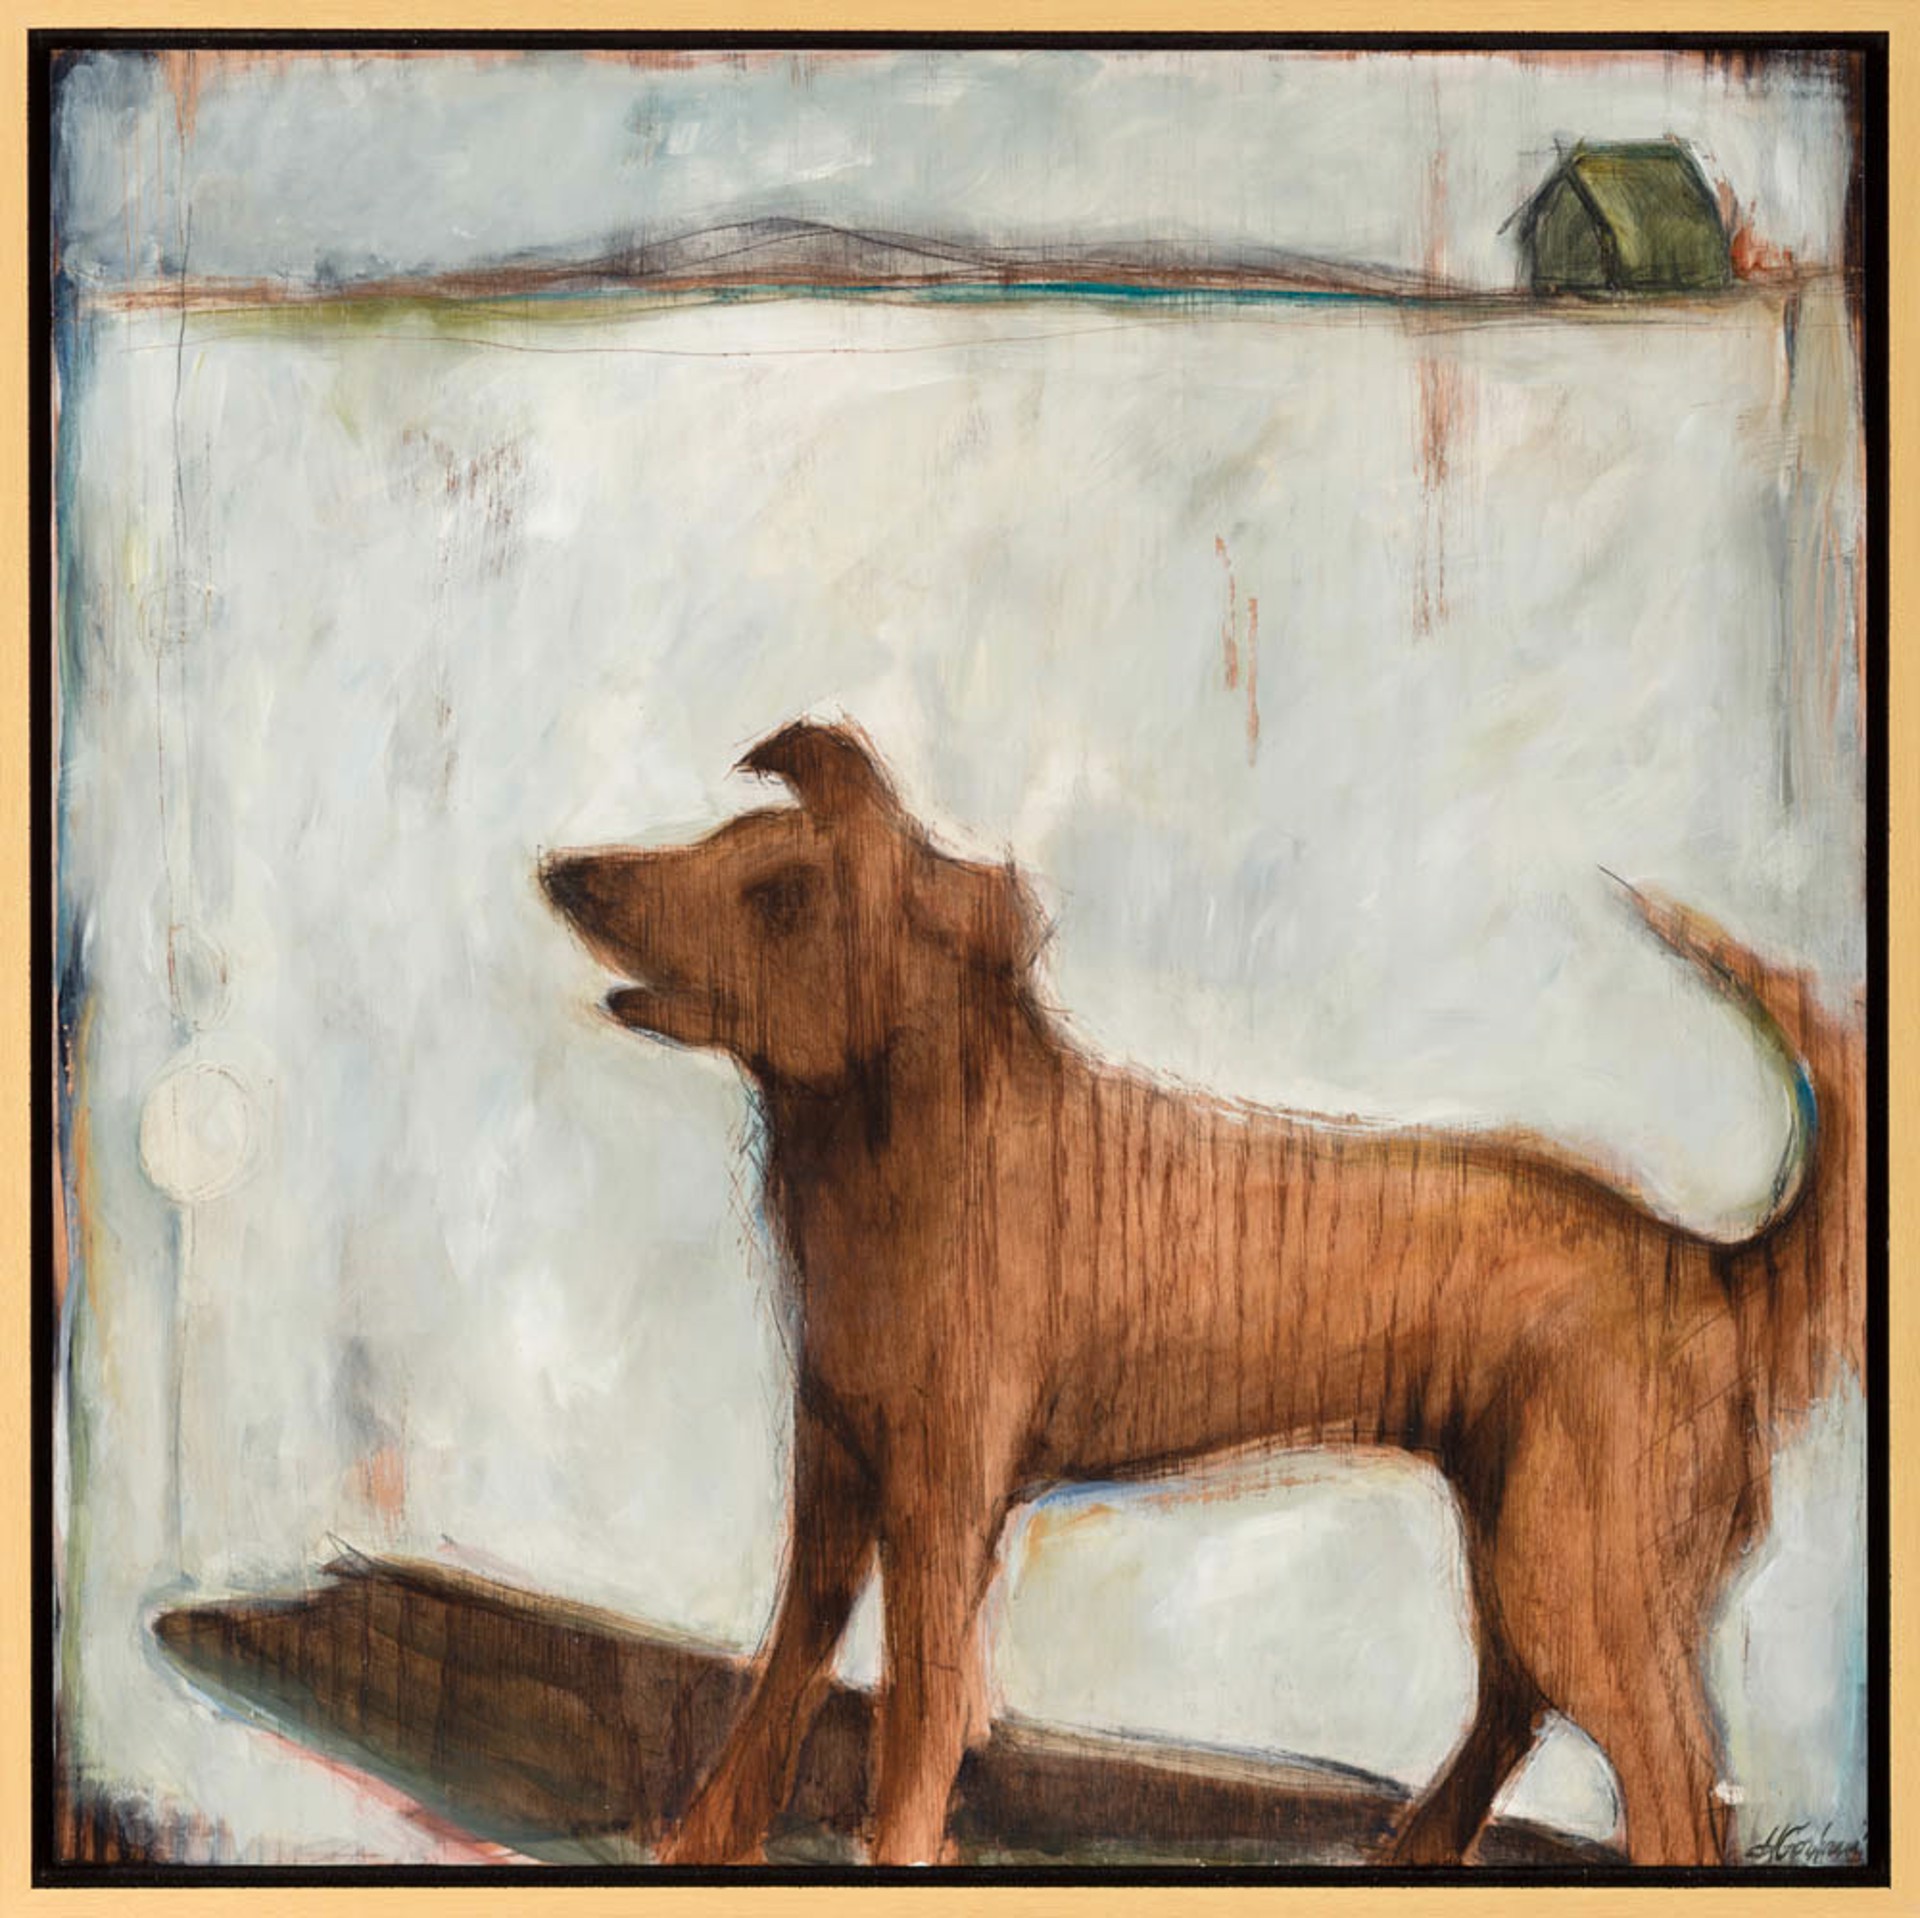 Dog Thoughts VI by Heather Gorham